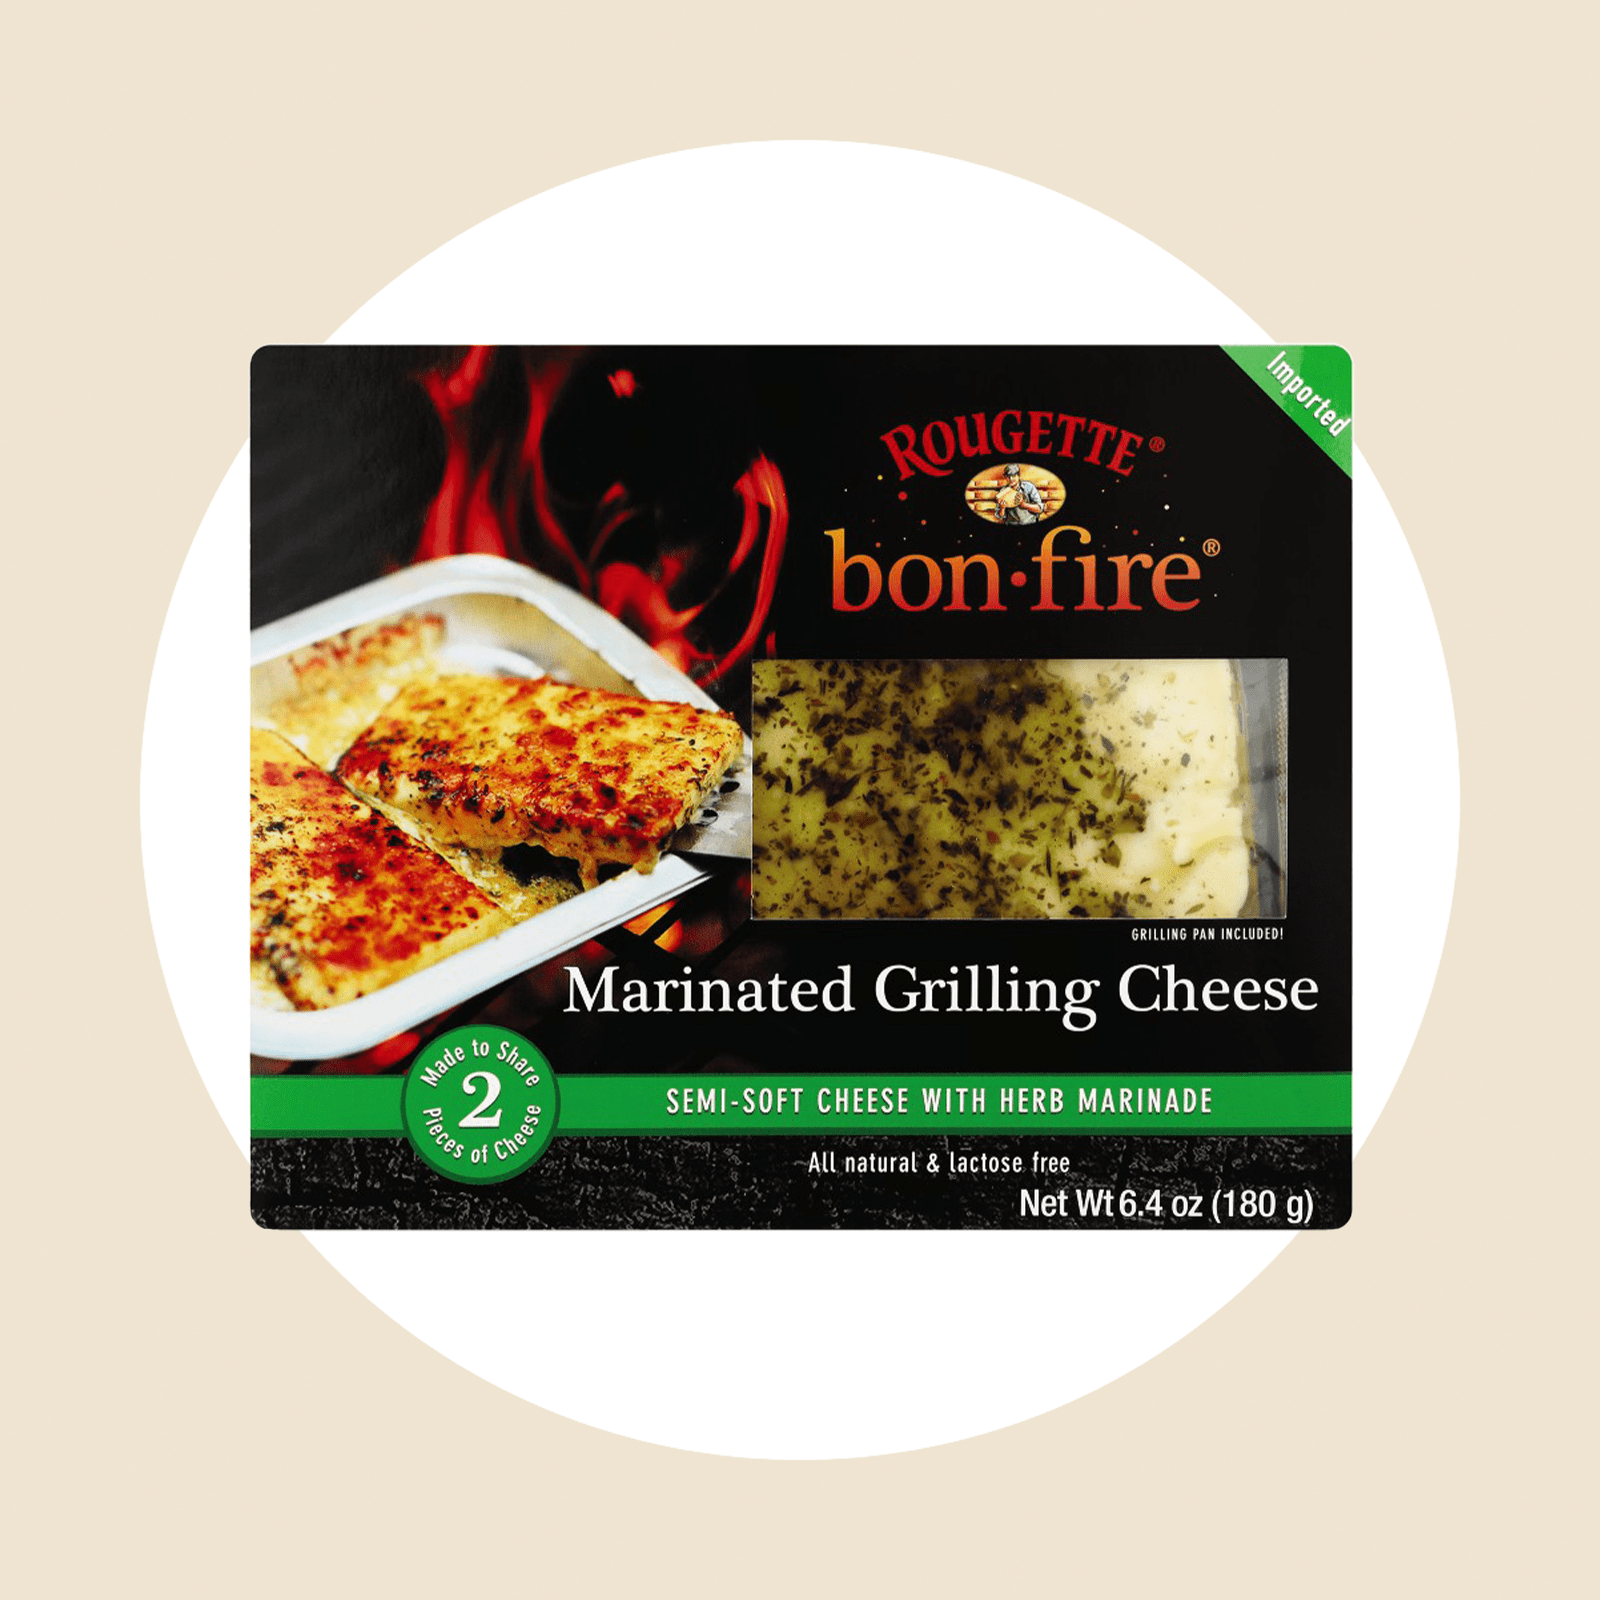 Rougette Bonfire Herb Marinated Grilling Cheese Courtesy Aldi